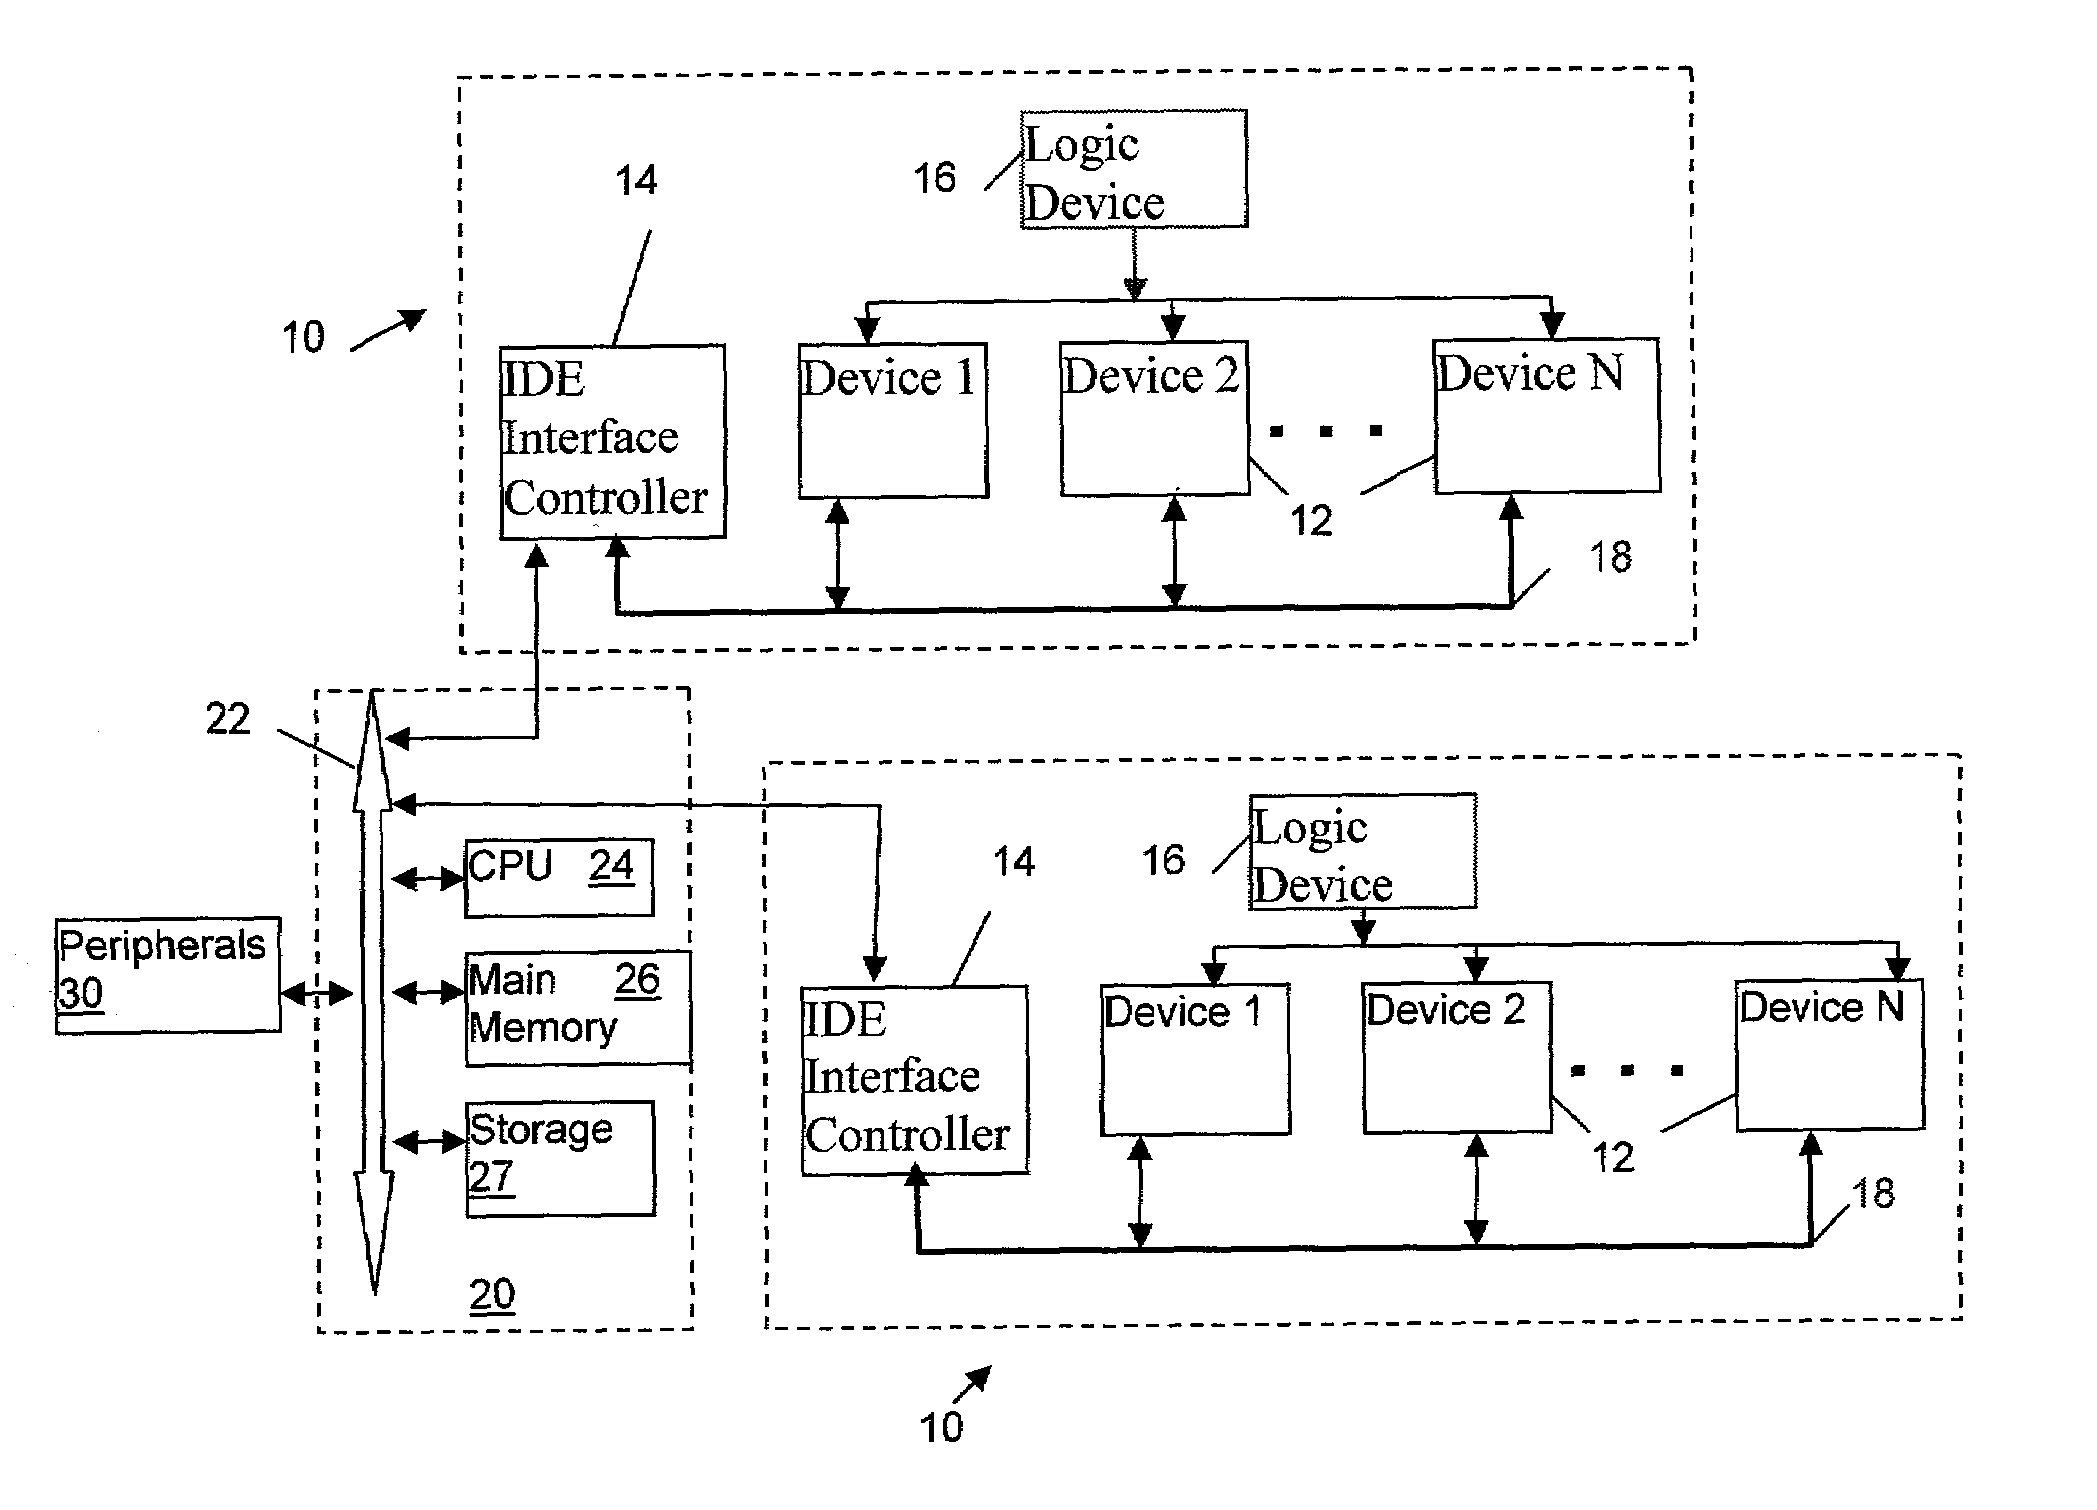 Method and apparatus for attaching more than two disk devices to an IDE bus